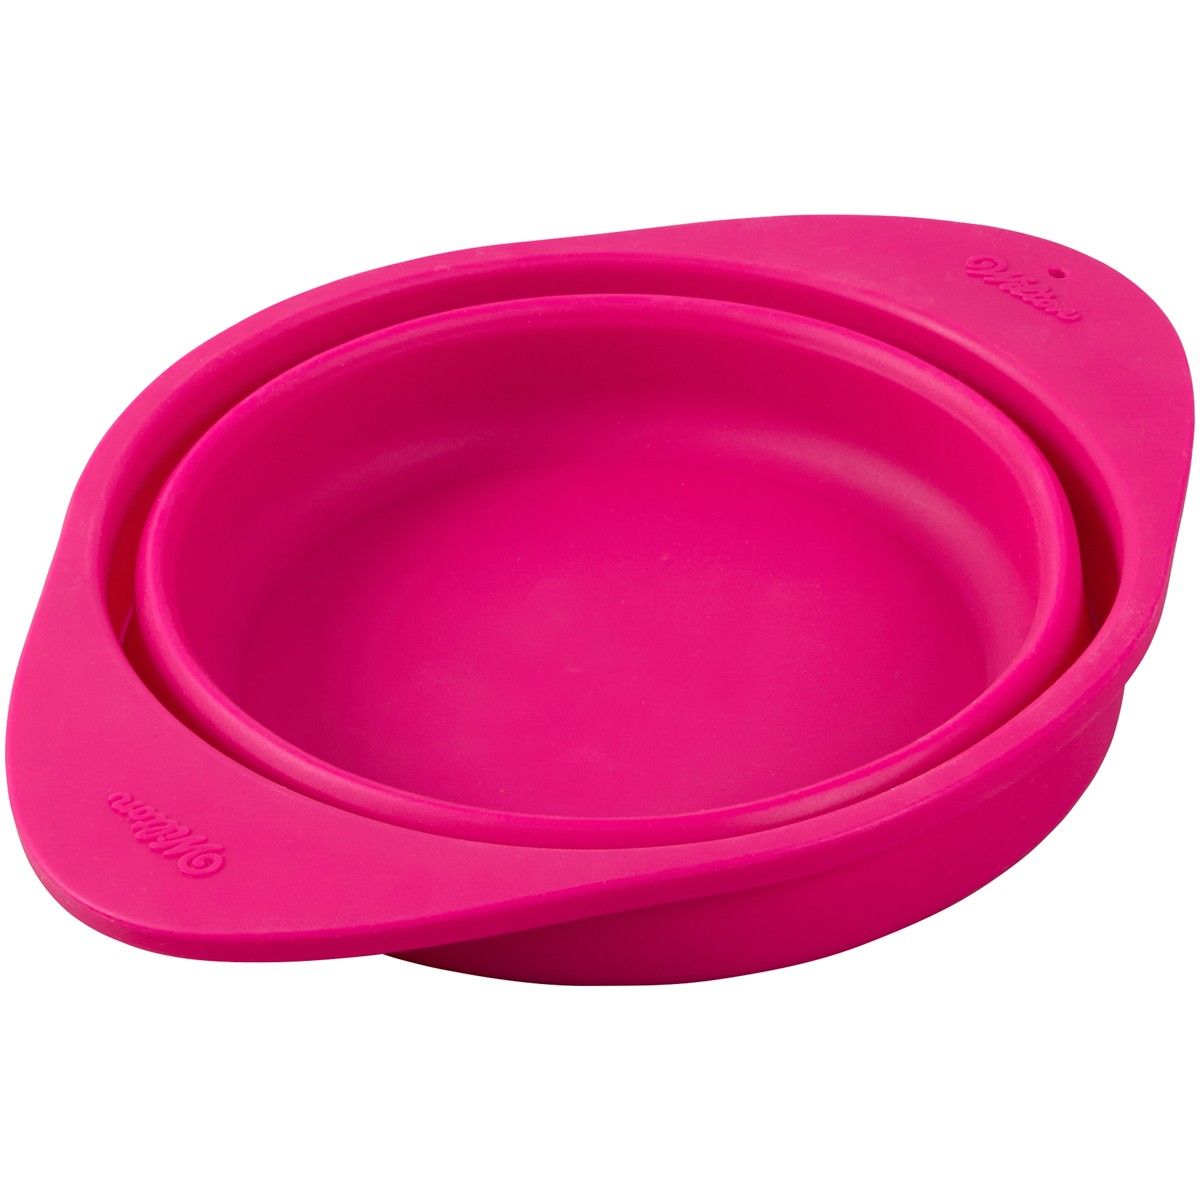 Wilton Candy Melts Collapsible Melting Bowl